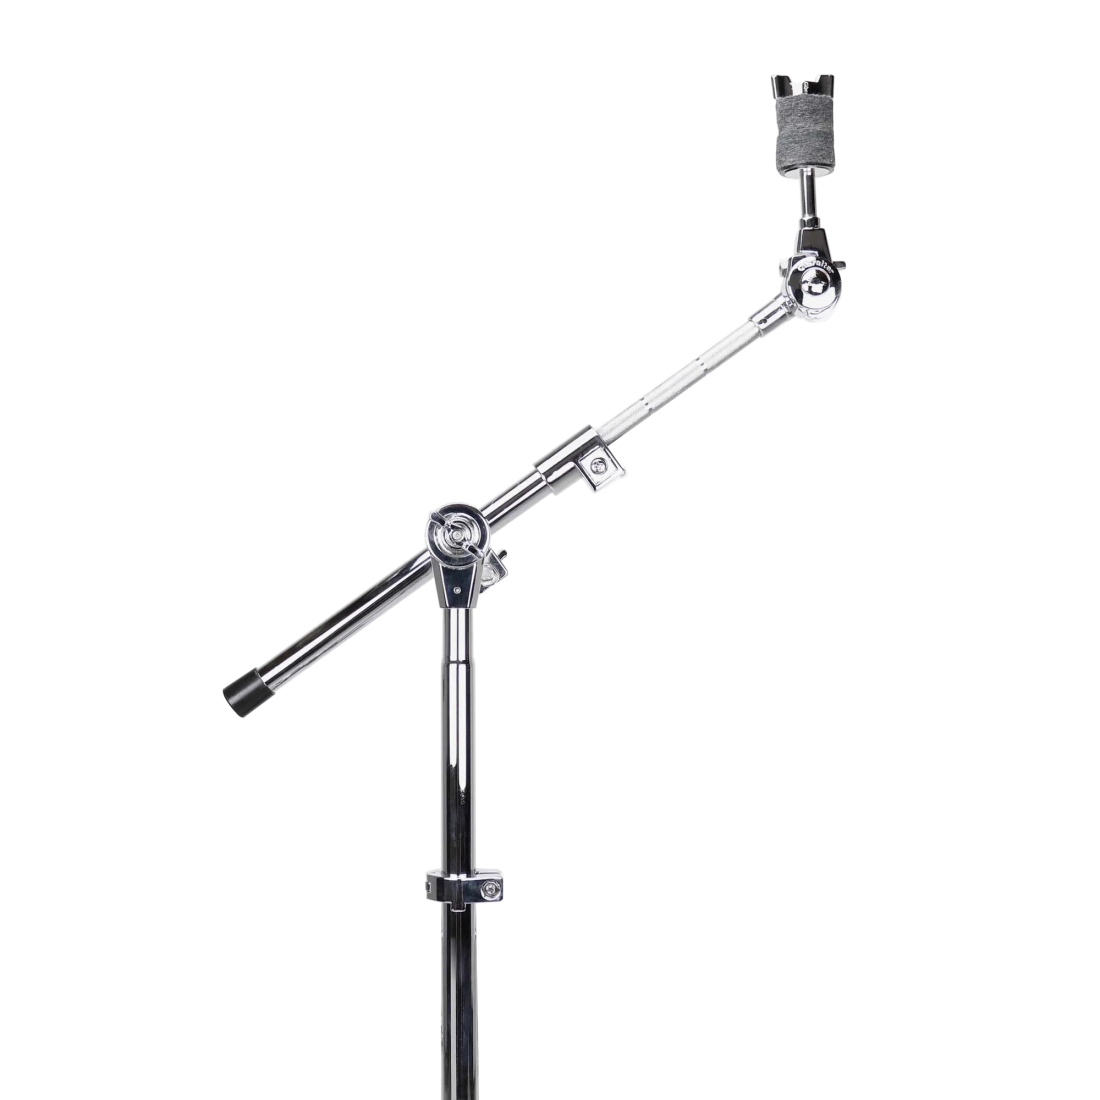 SC-EXMBBT Extendable Cymbal Boom Arm with Gearless Brake Tilter